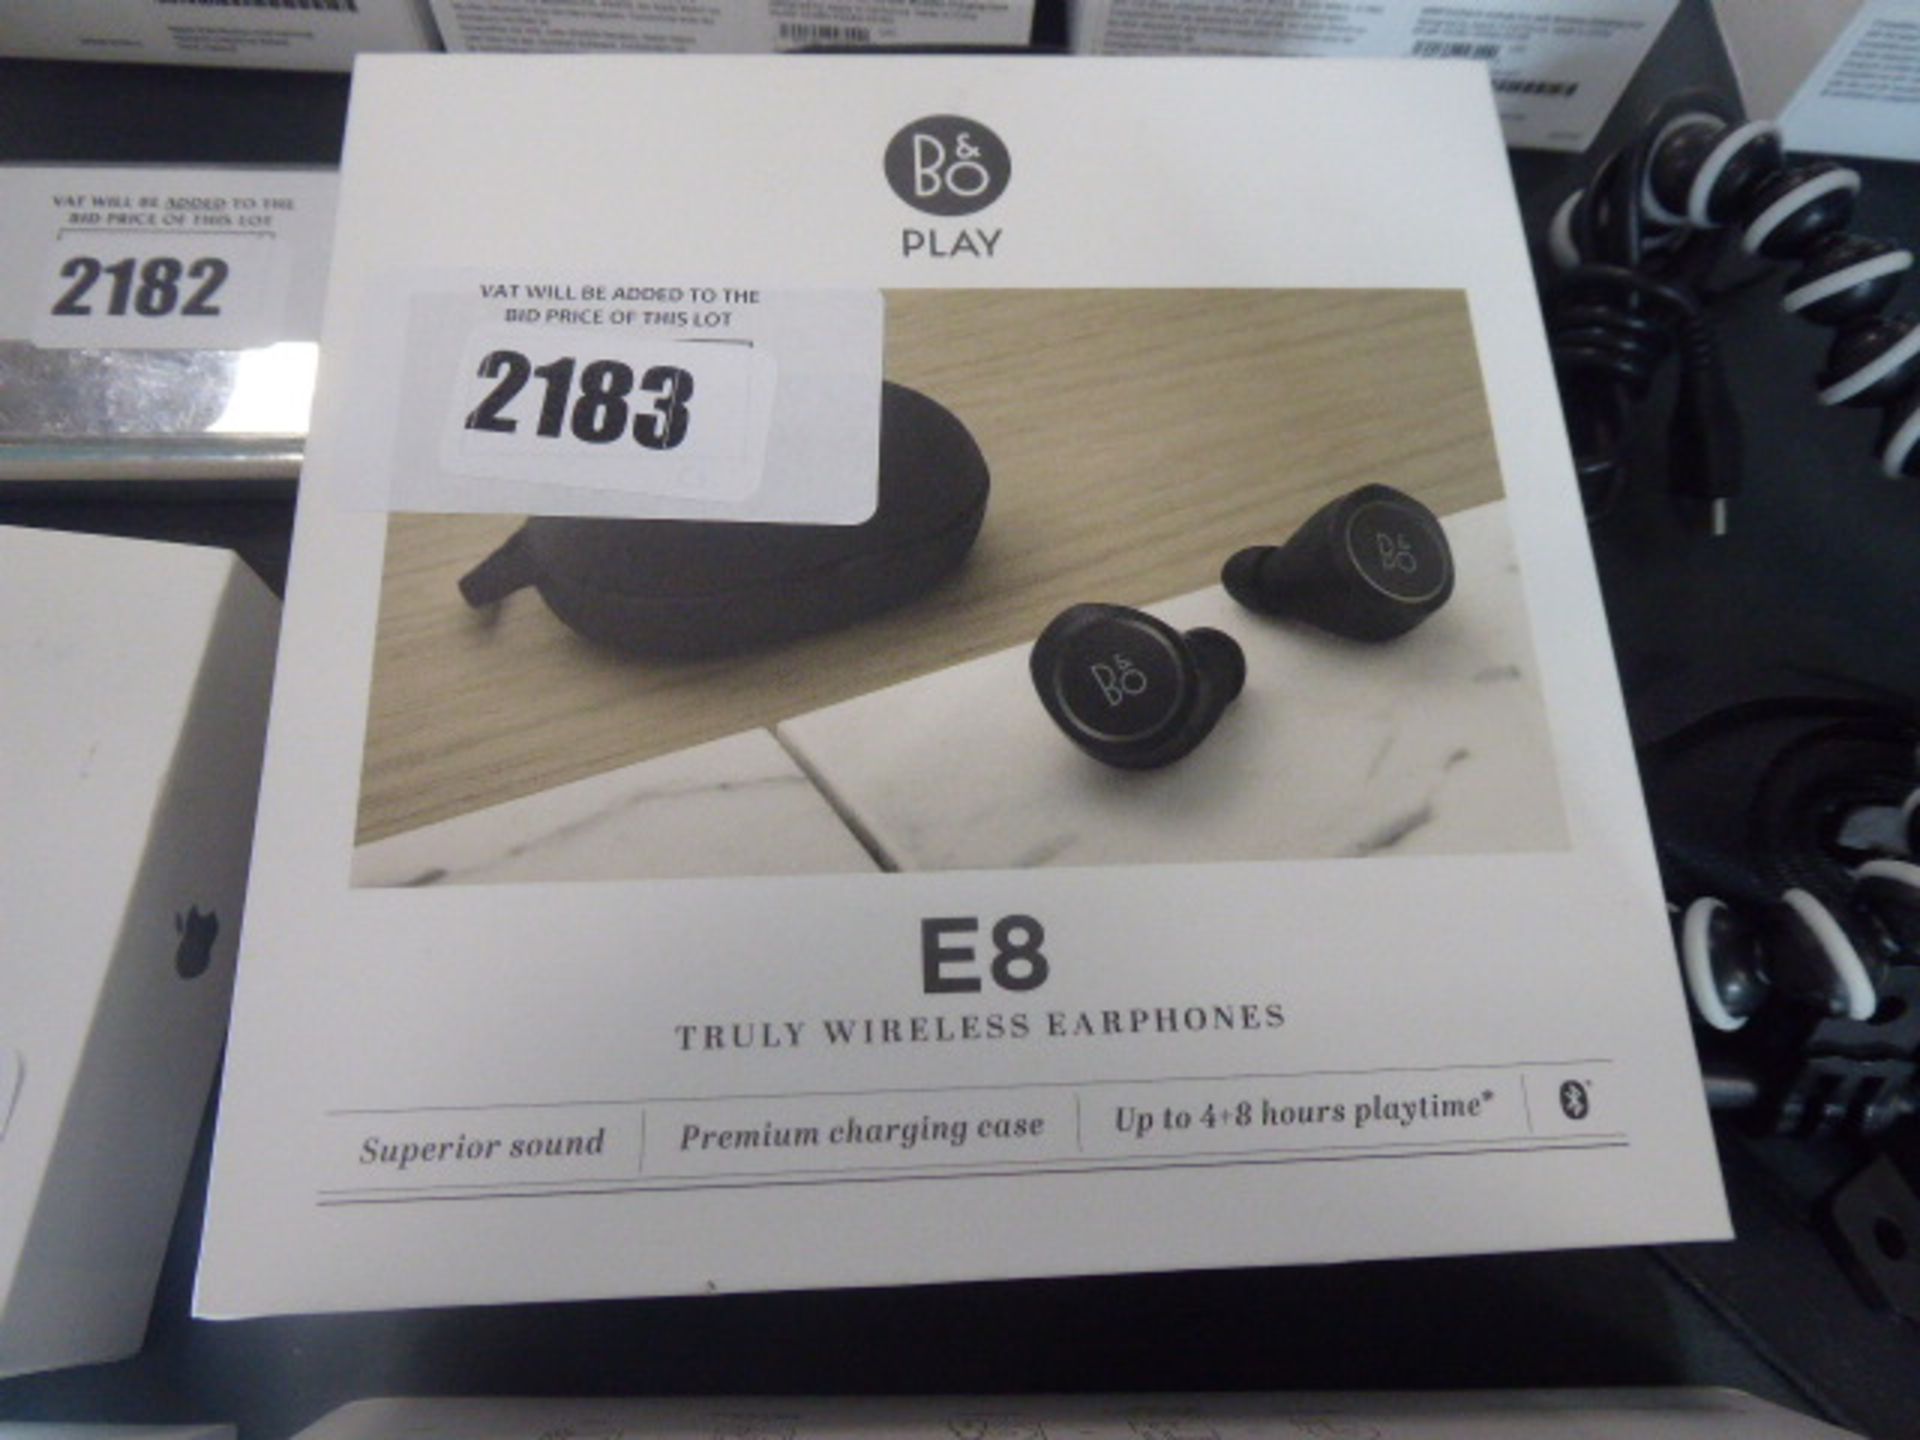 Bang & Olufsen Beoplay E8 True Wireless earbuds with wireless charging case and spare eartips